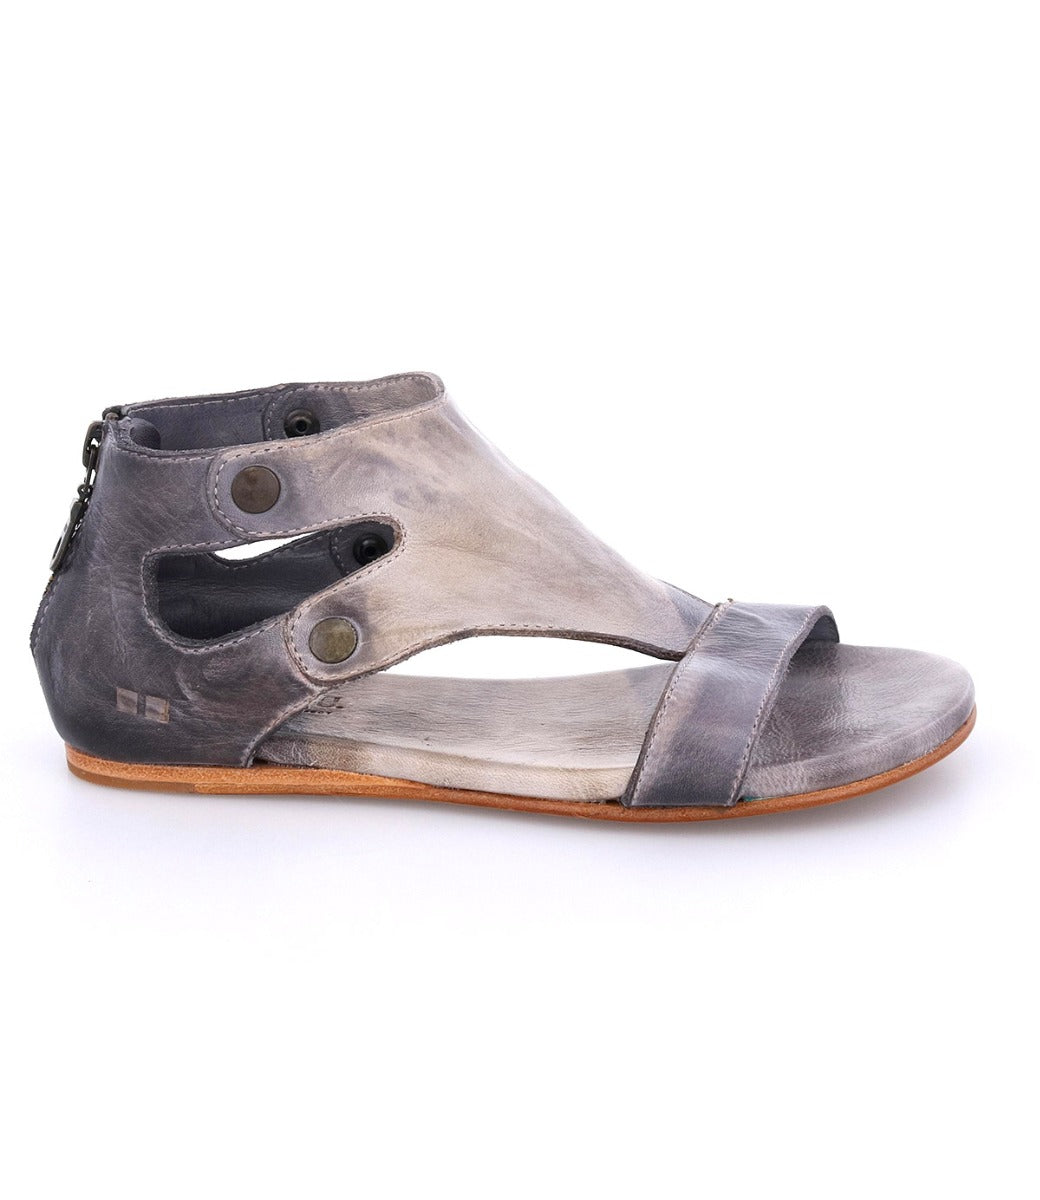 Bed Stu's Soto women's grey leather sandals.